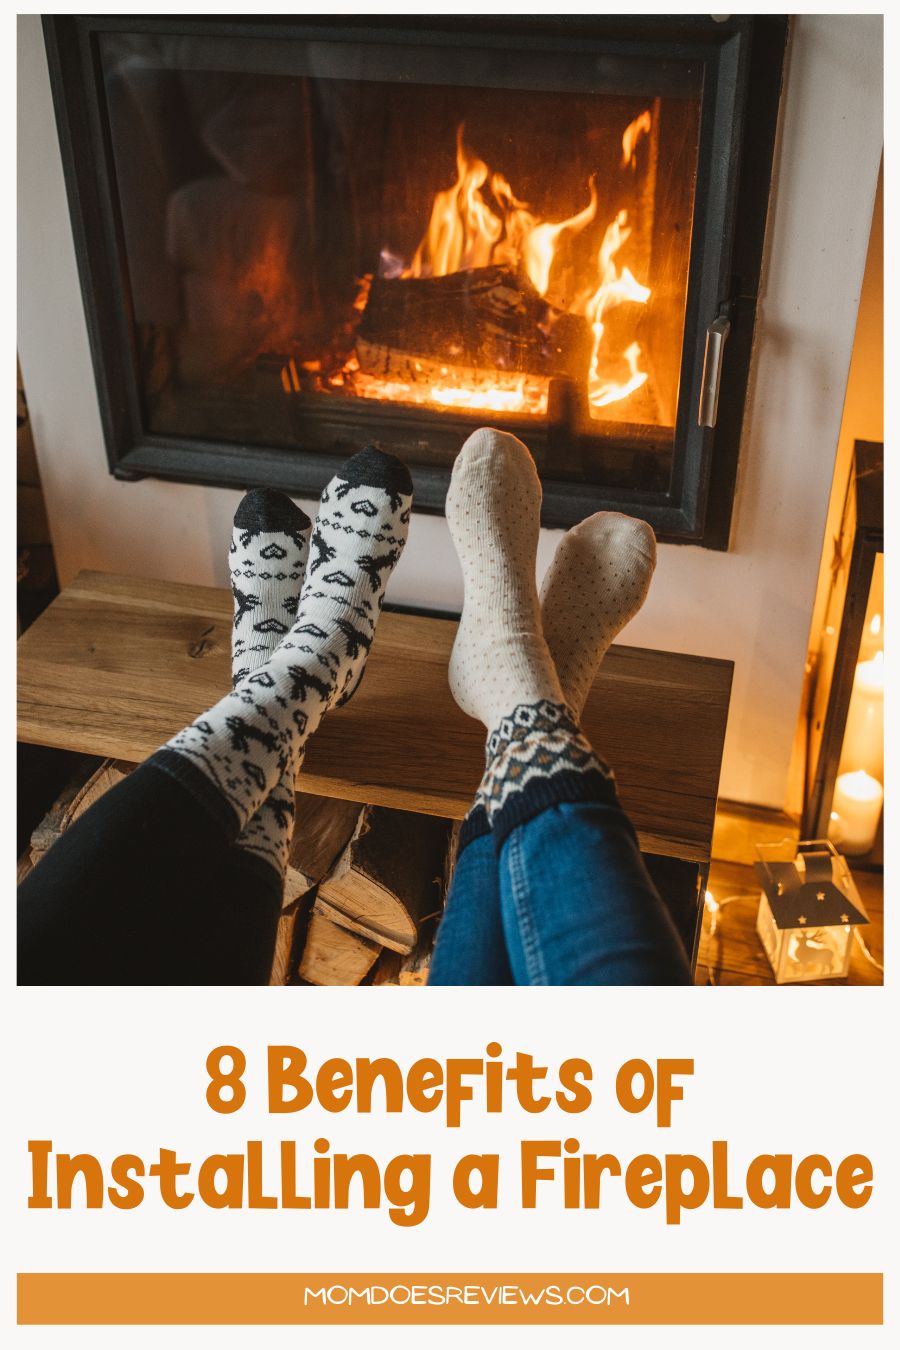 8 Benefits of Installing a Fireplace